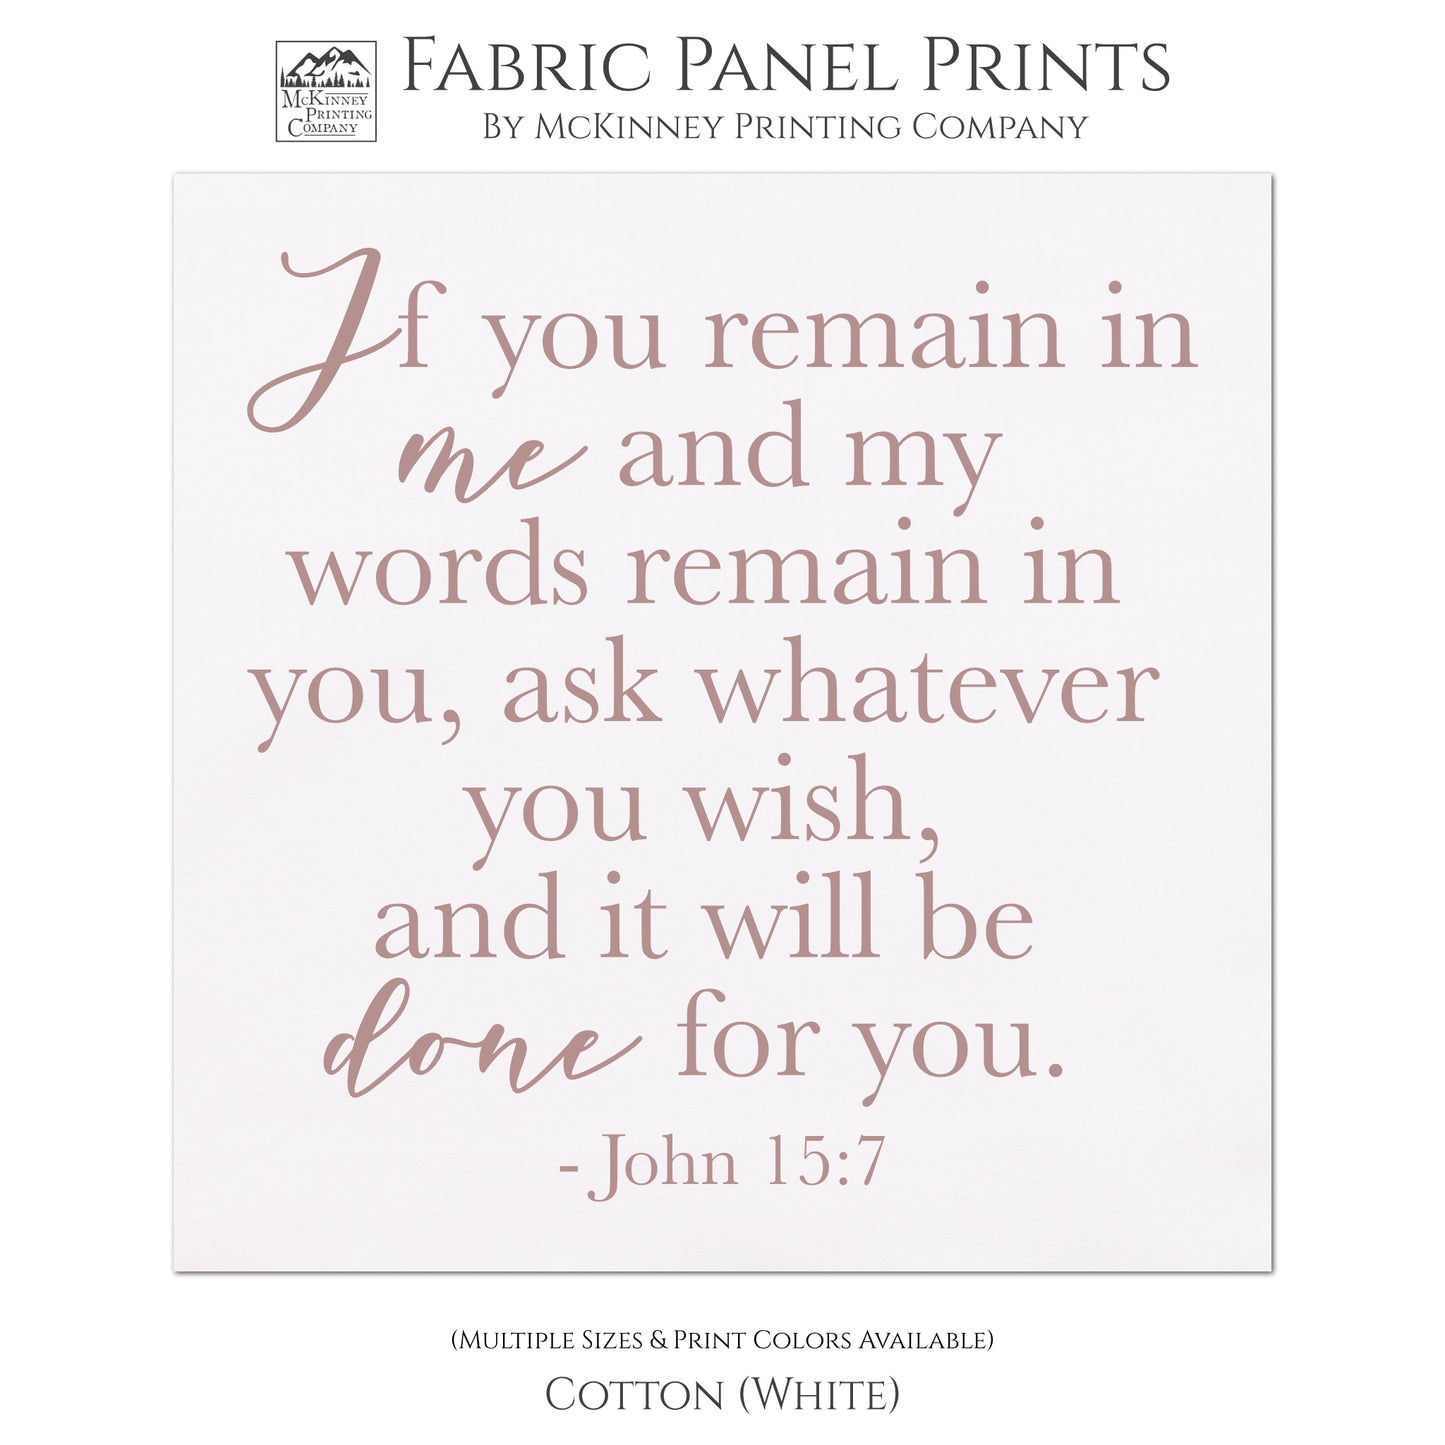 Bible Verse Wall Art - If you remain in me and my words remain in you, ask whatever you wish, and it will be done for you. - John 15 7 - Scripture Fabric, Quilt Block, Large, Small - Cotton, White